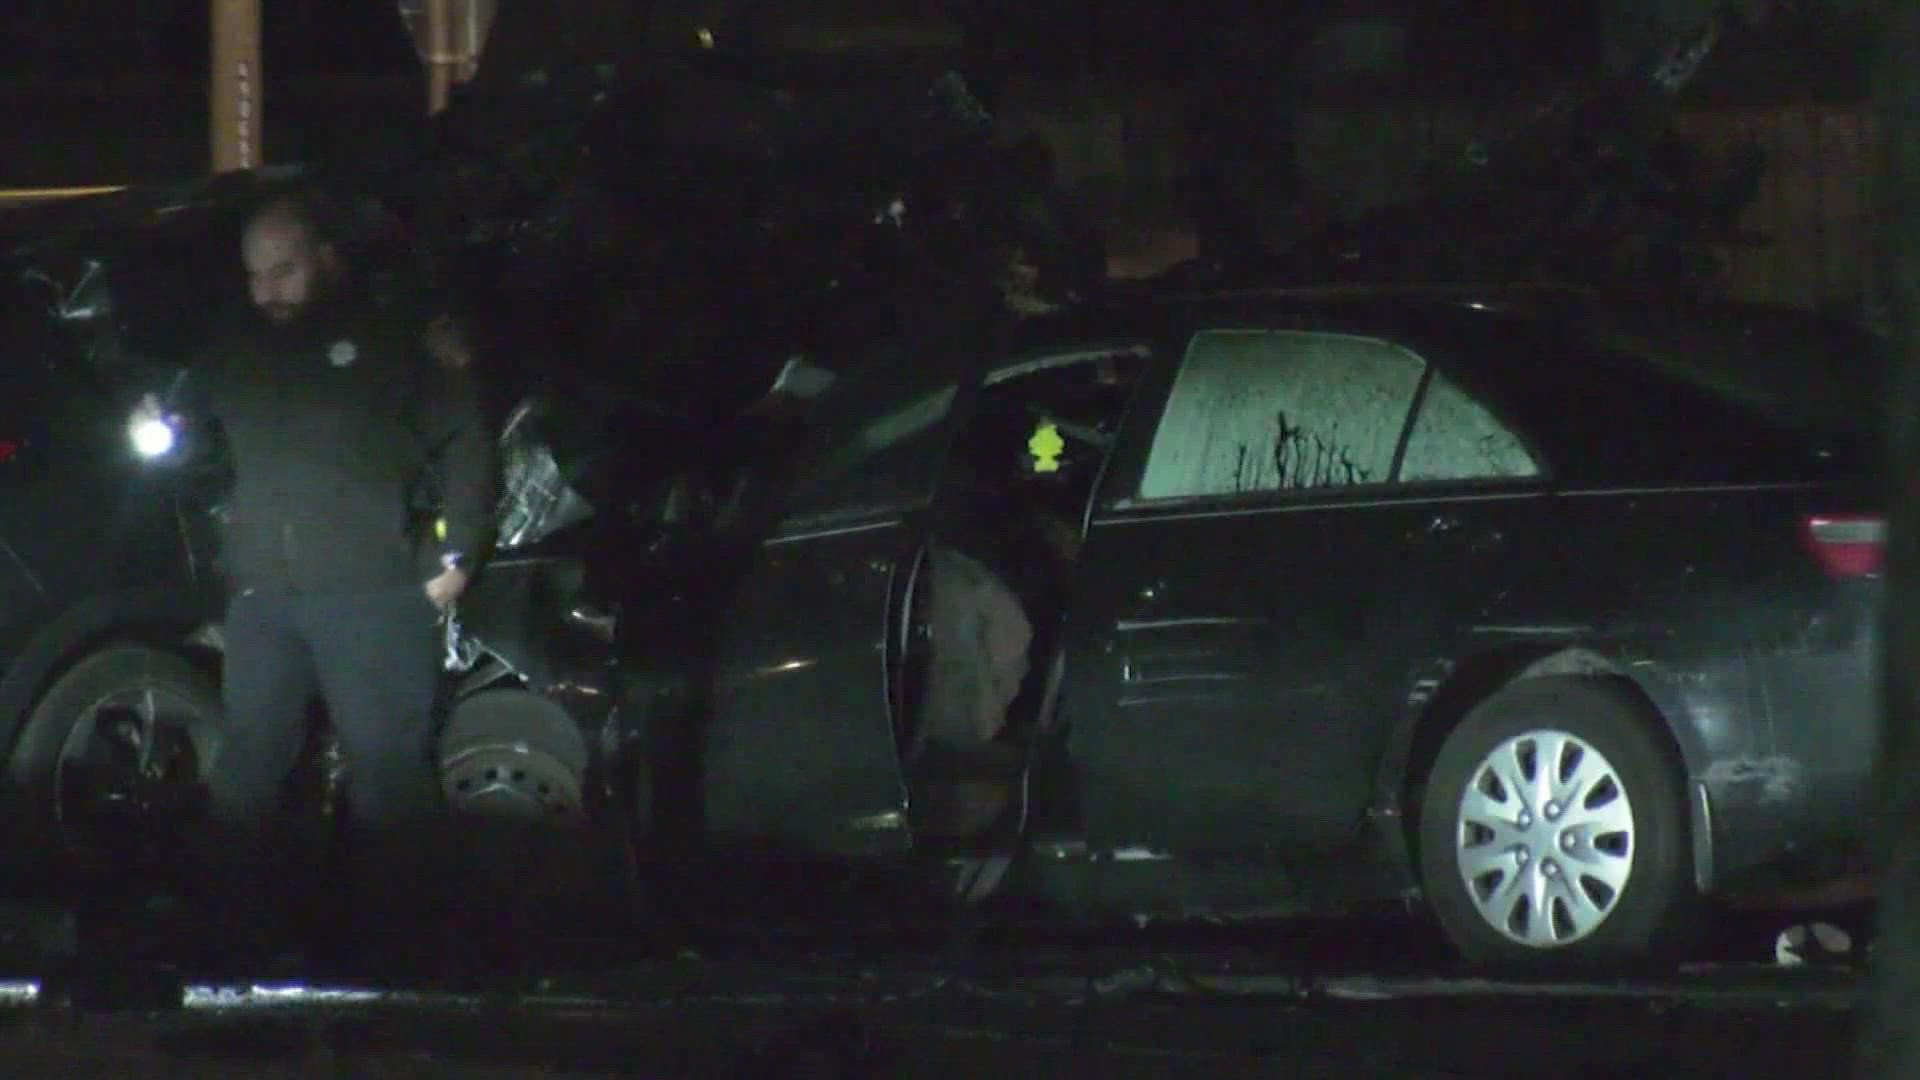 Four people were taken to the hospital after the crash according to the Harris County Sheriff's Office.